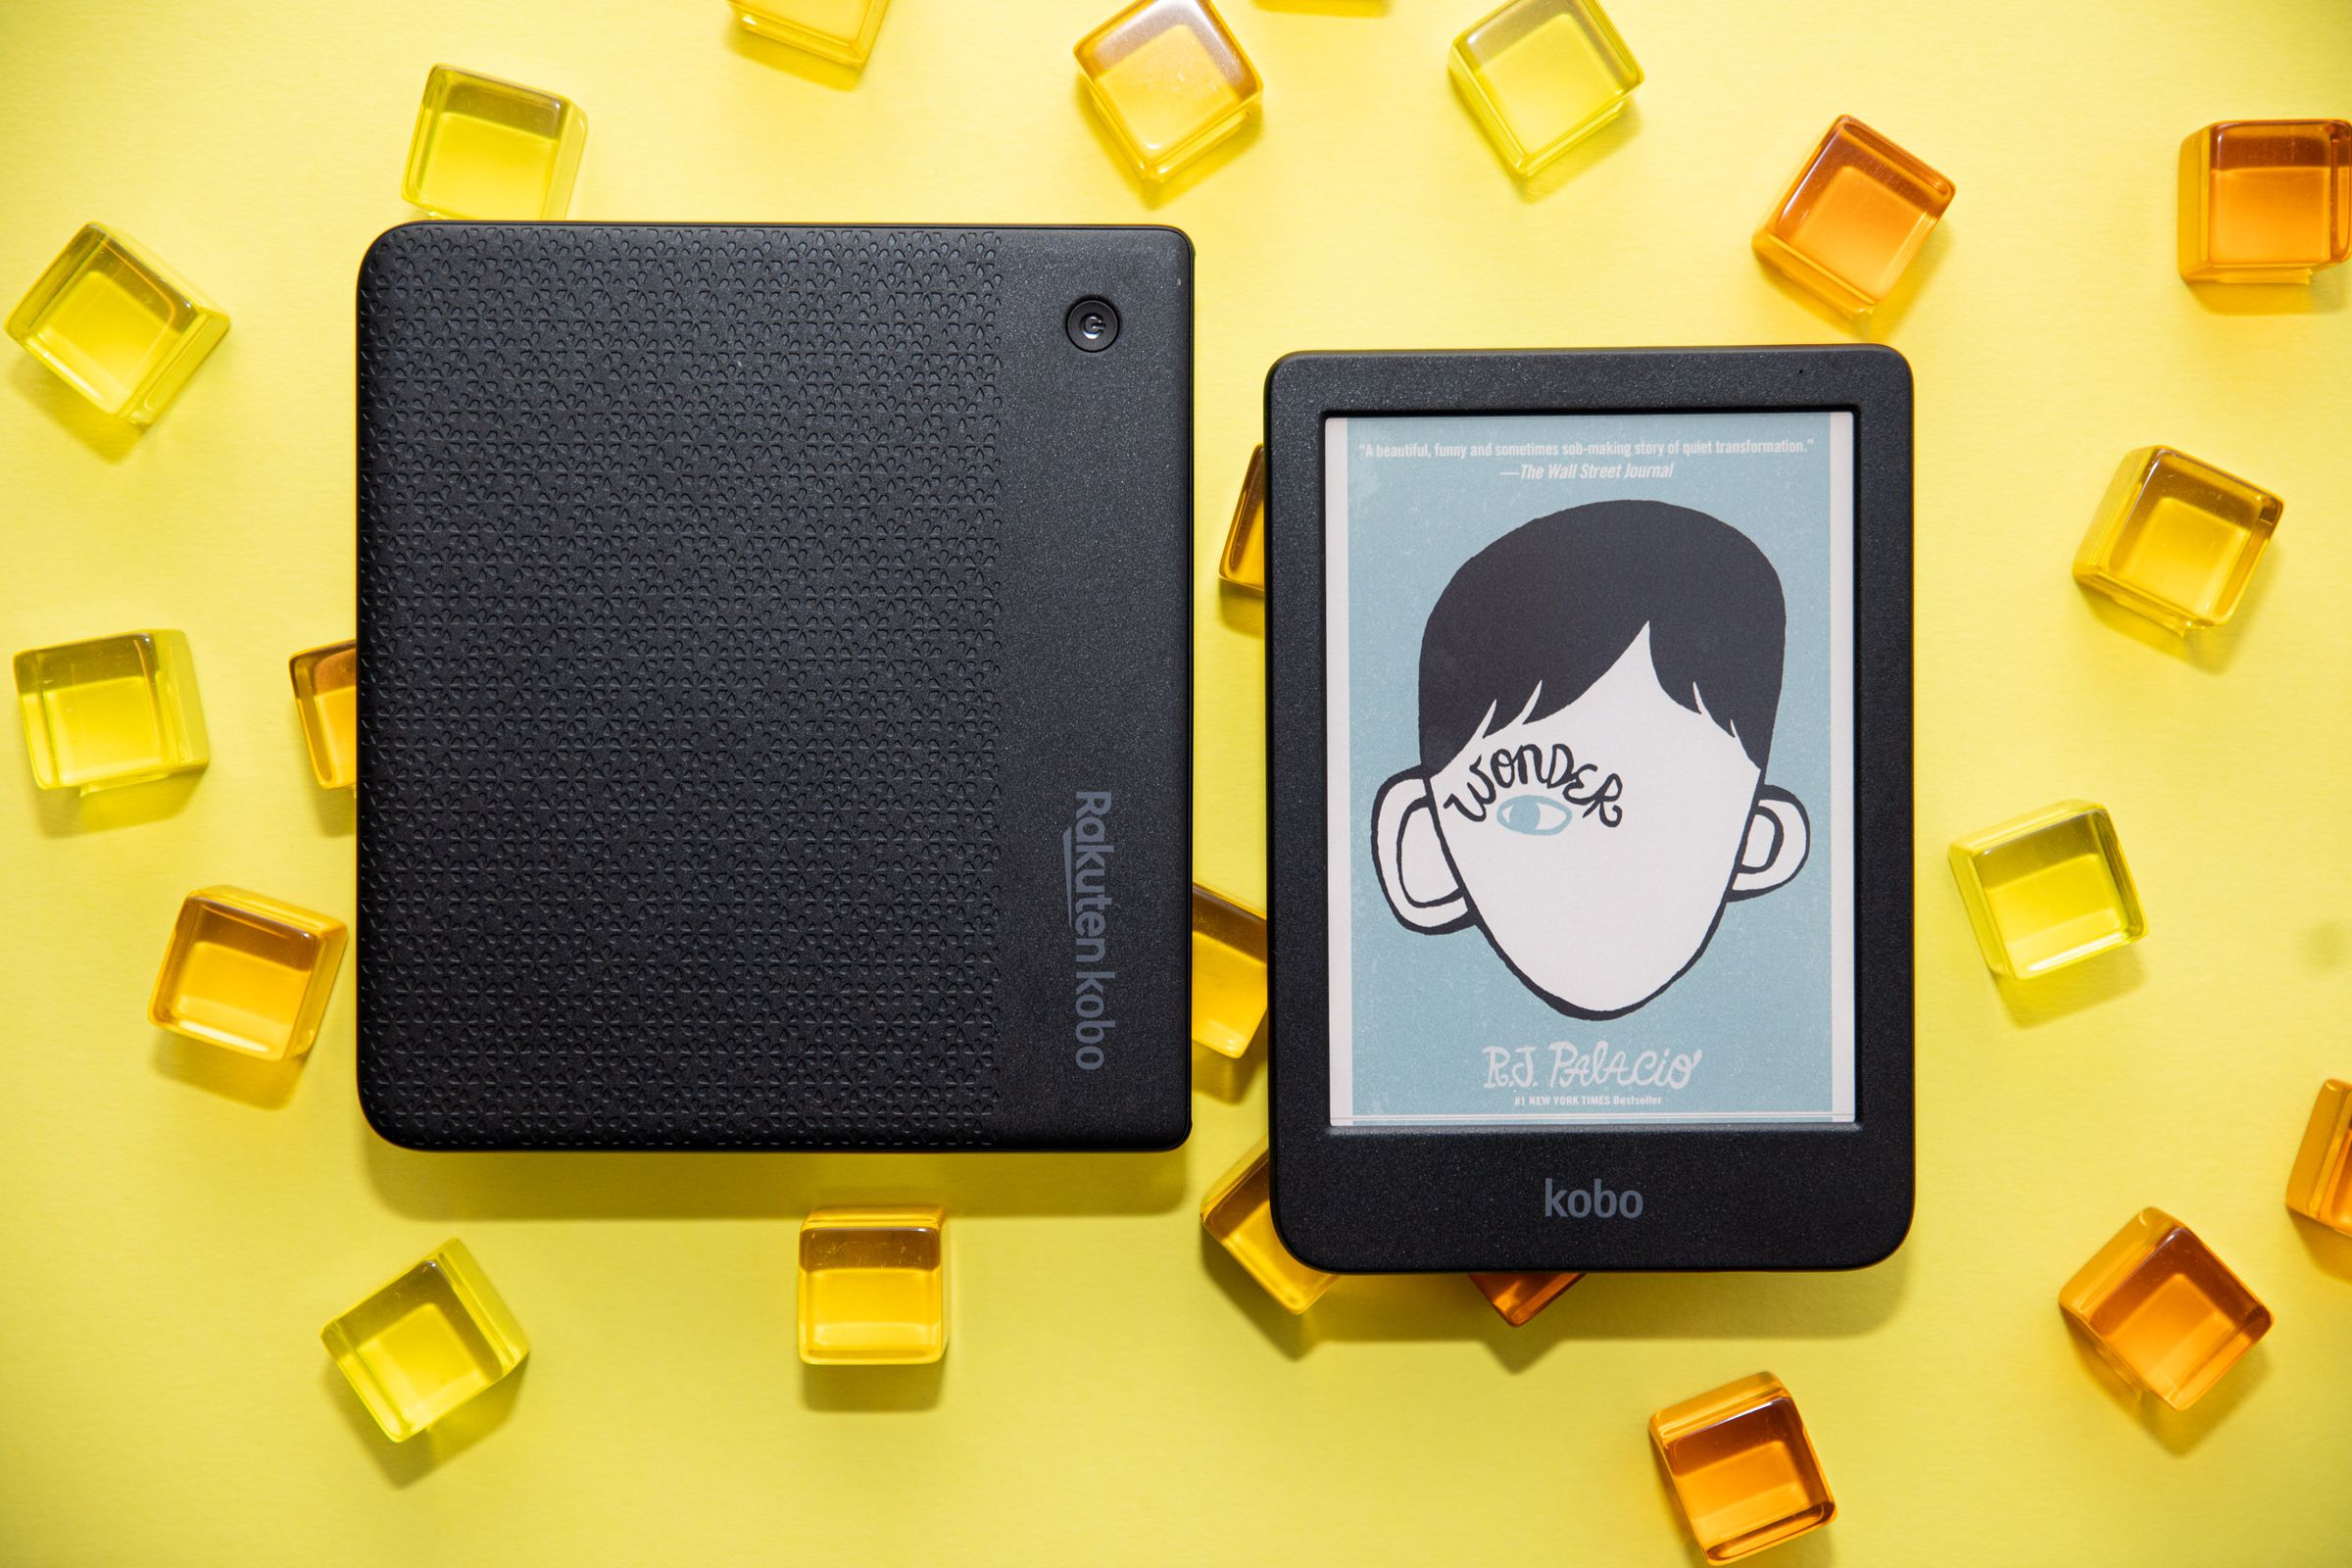 An image of two ereaders on a vibrant yellow background. The color displays appears less vibrant.